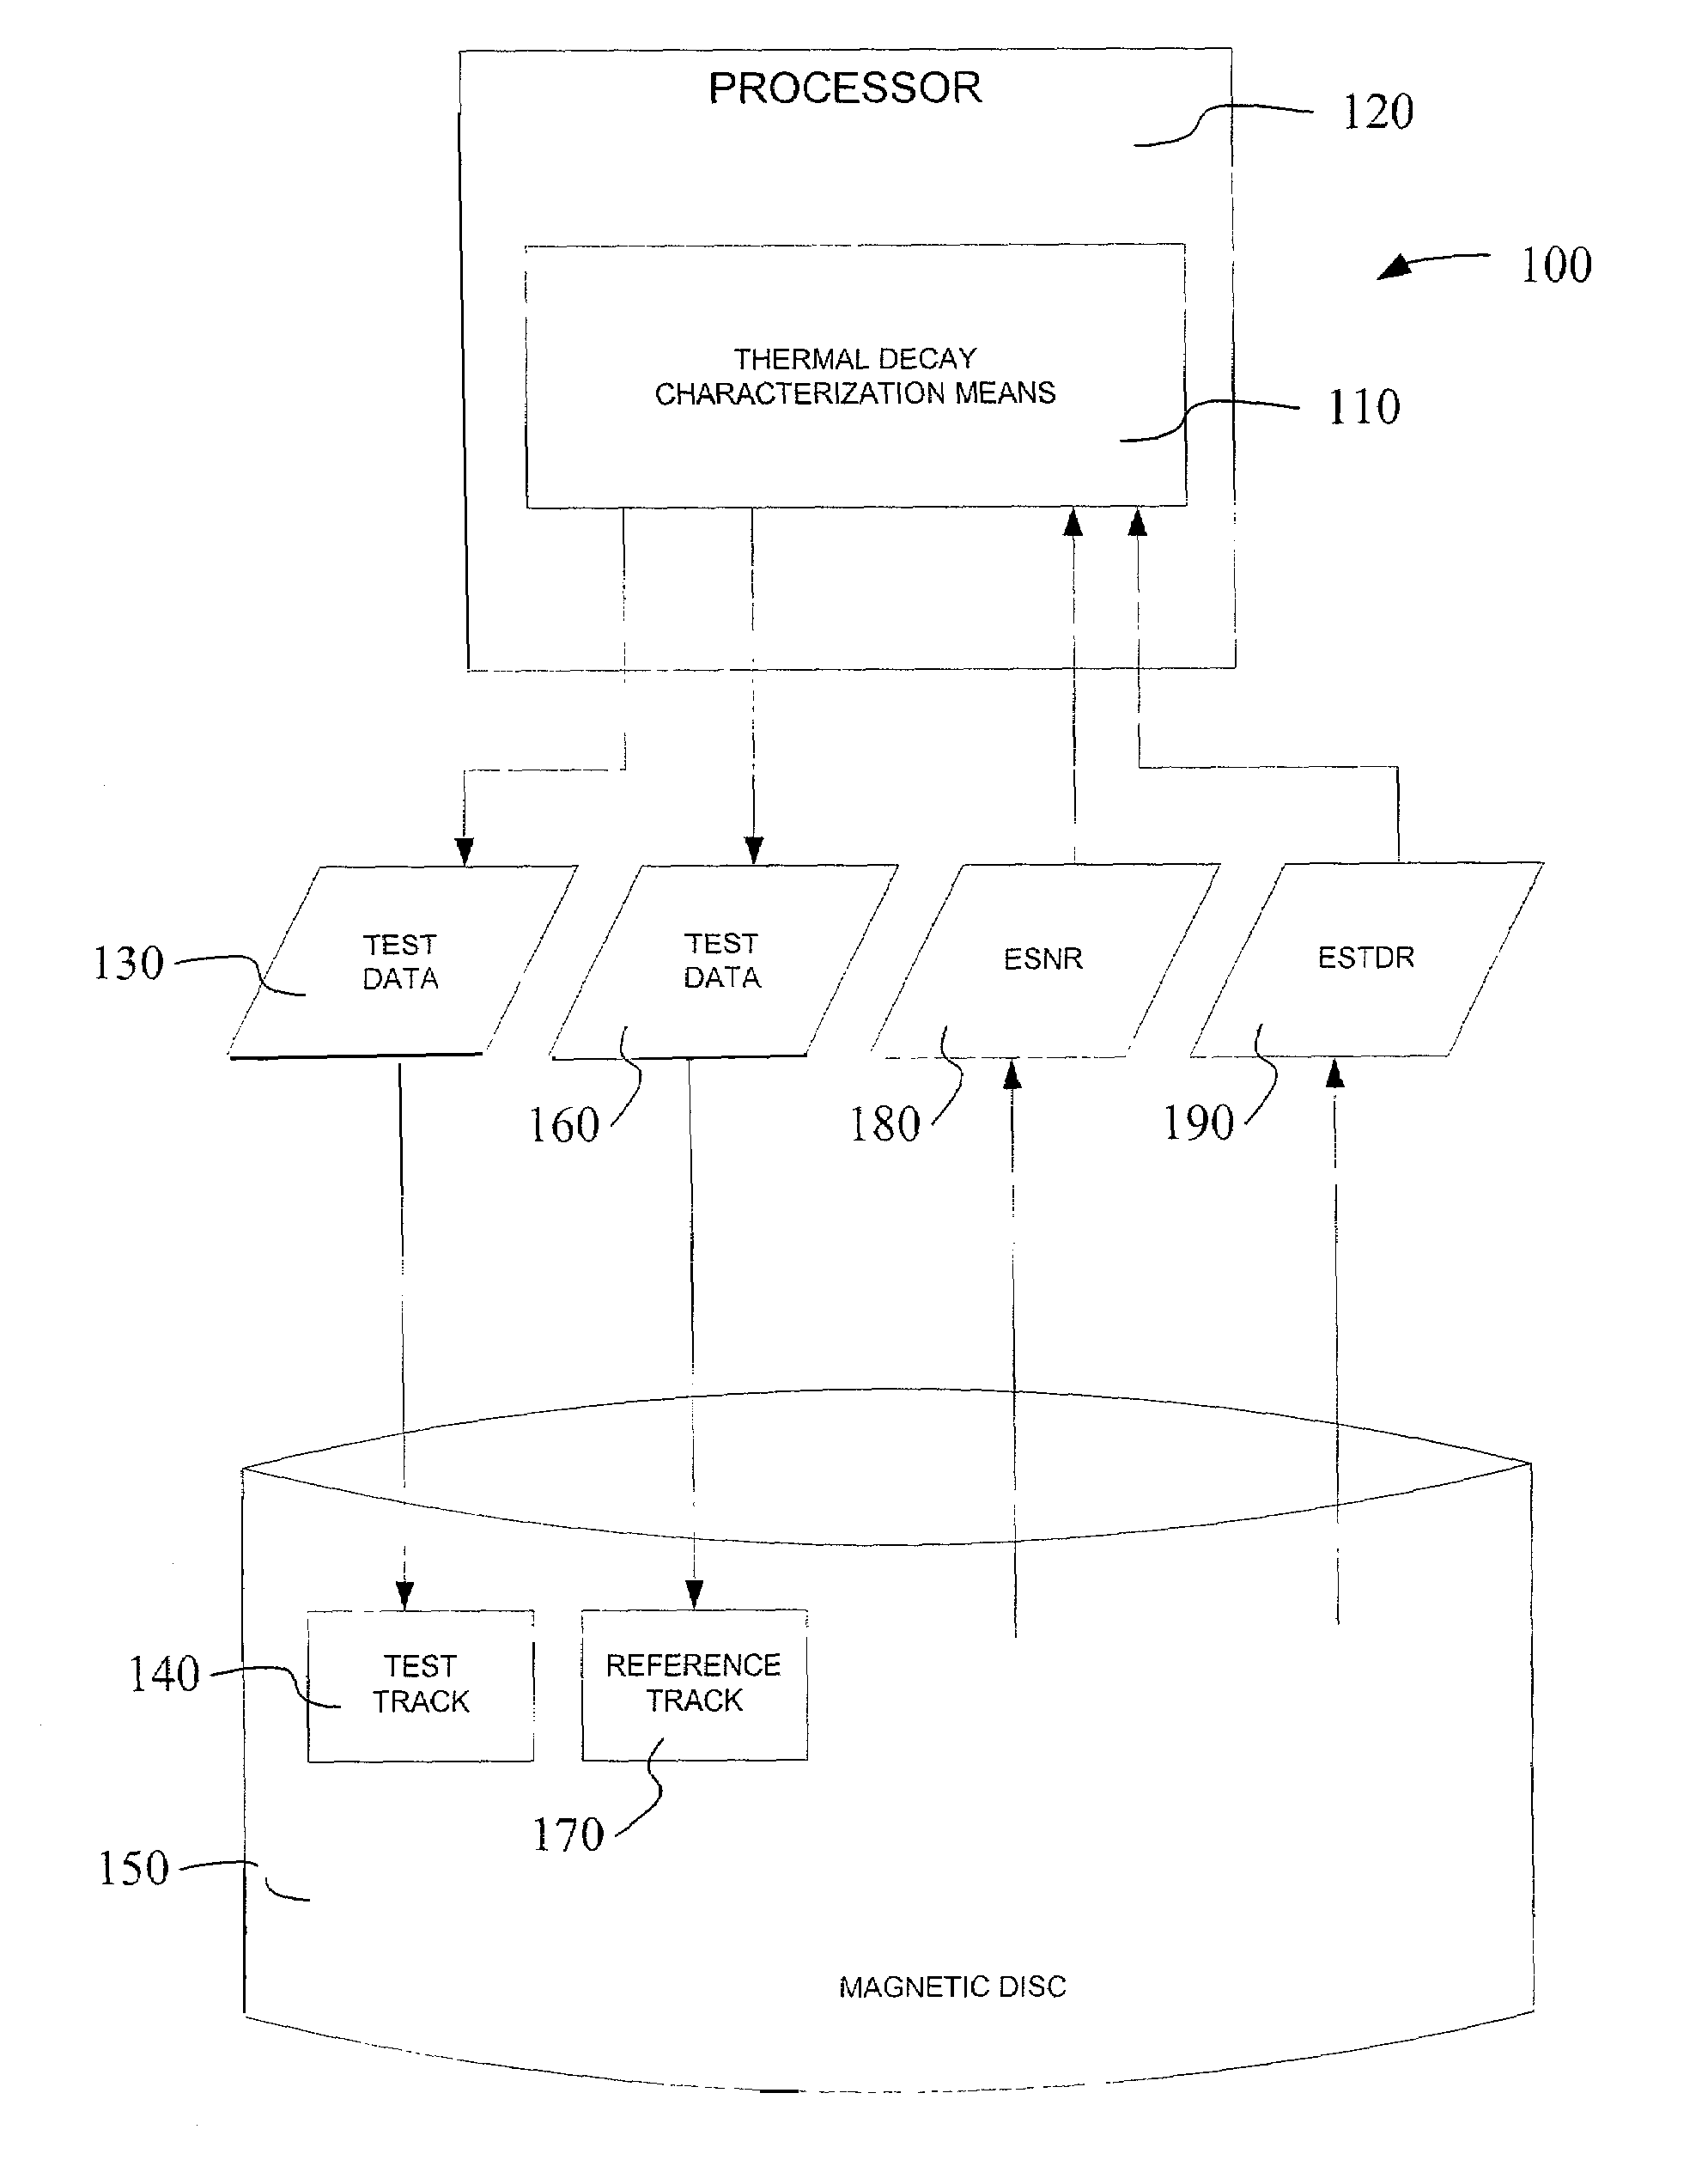 Systems, apparatus, and methods to determine thermal decay characterization from an equalized signal-to-noise ratio of a magnetic disc drive device